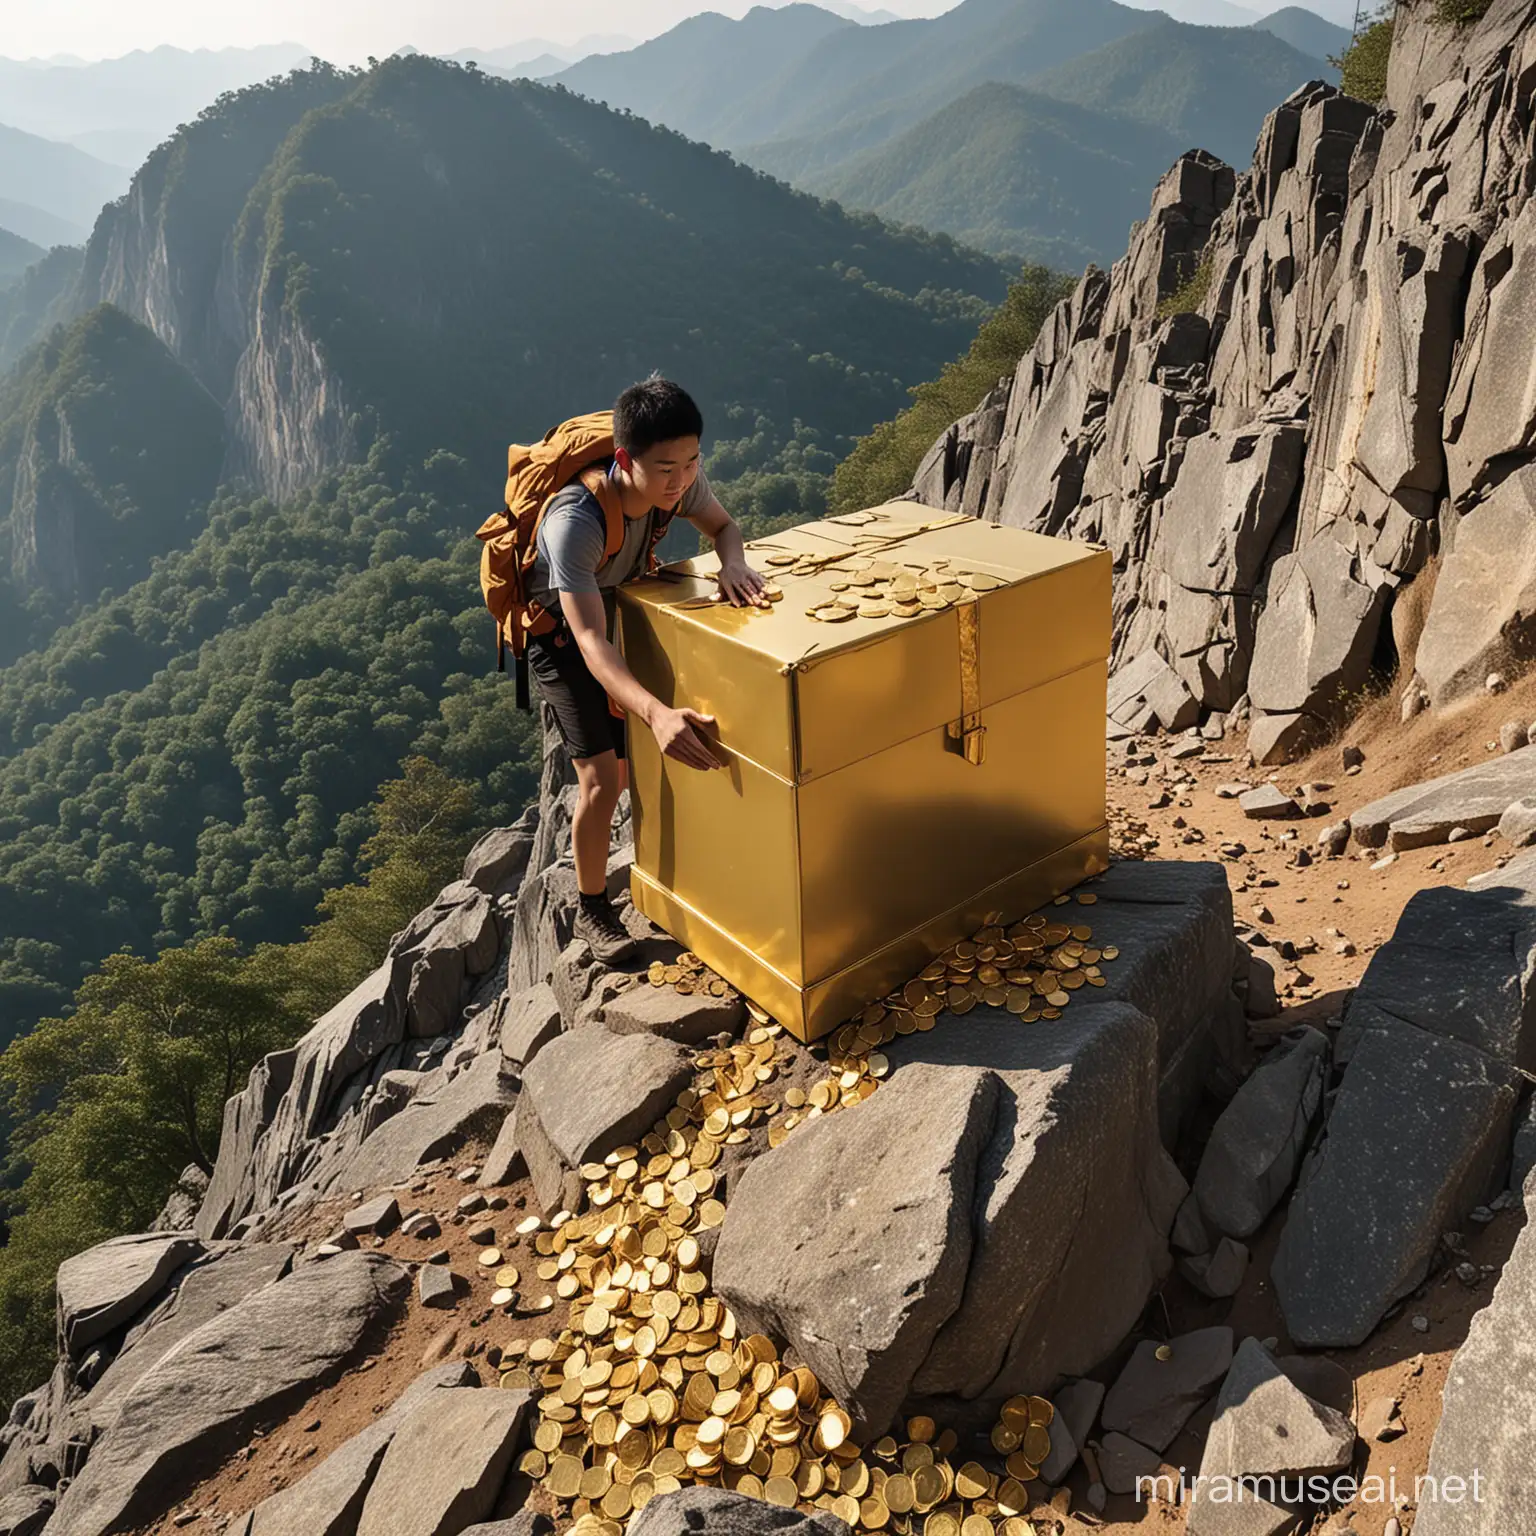 Triumphant Student Discovers Treasure on Mountain Summit